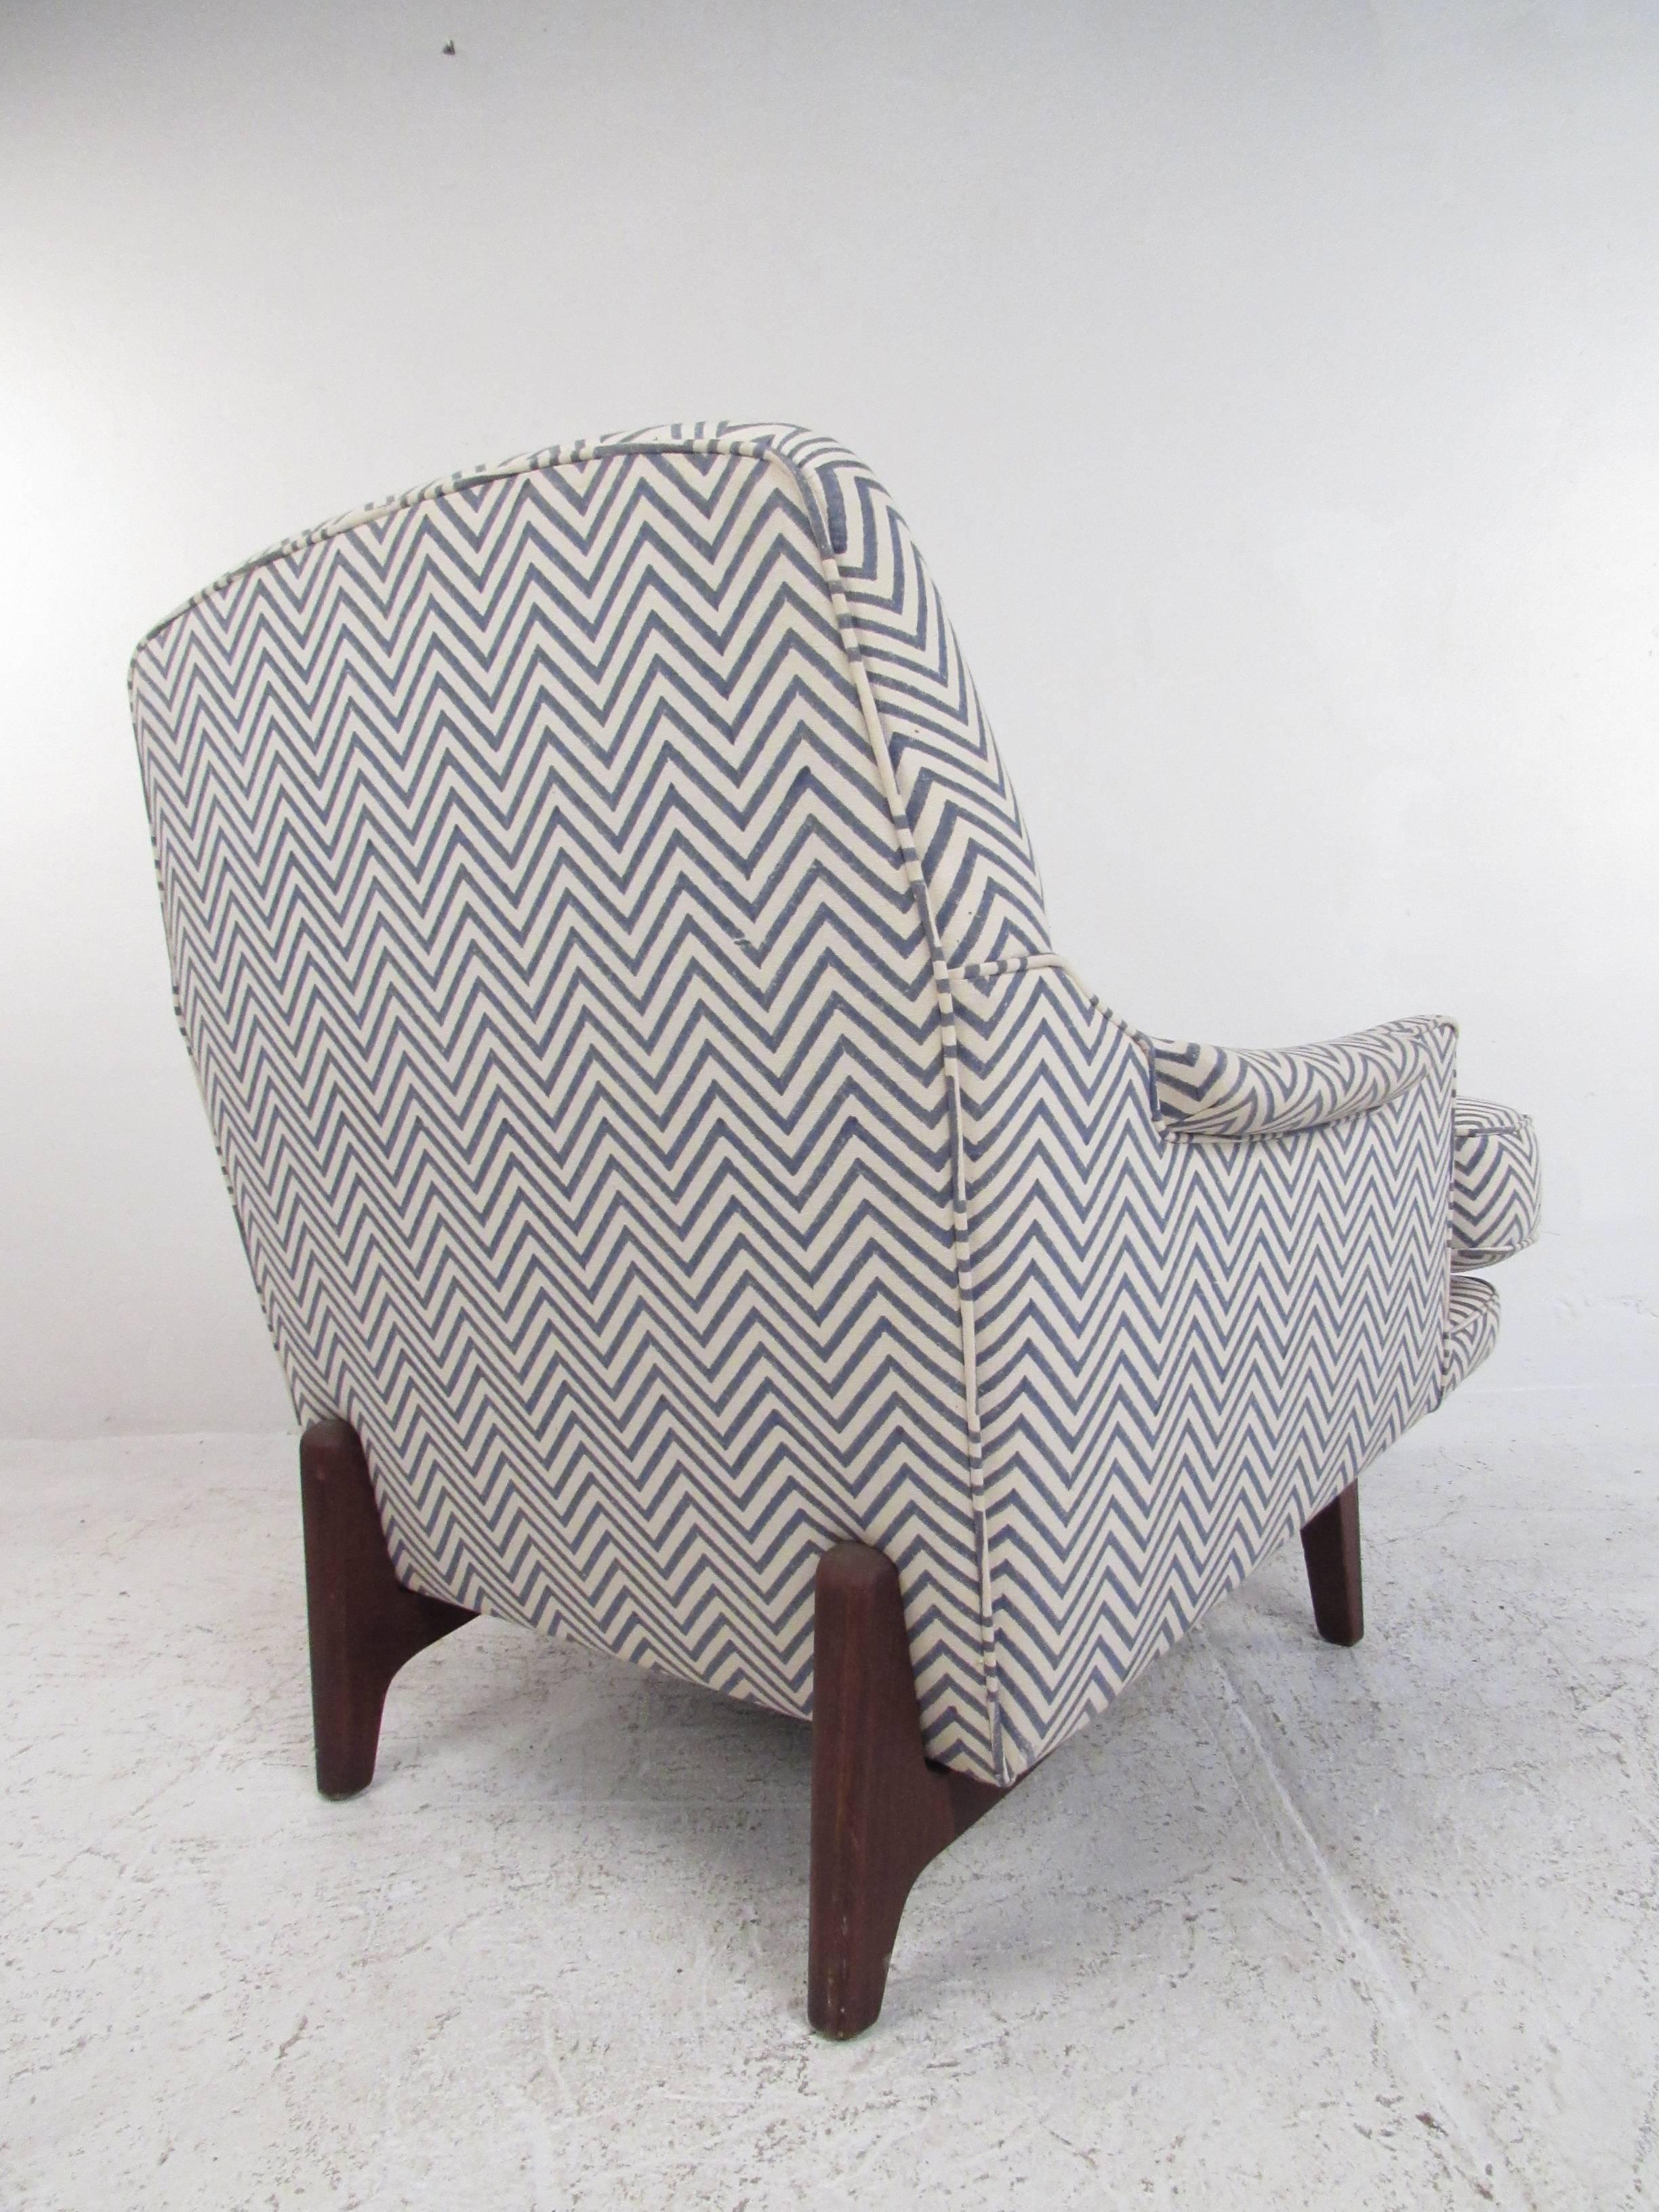 American Mid-Century Roger Sprunger for Dunbar Lounge Chair with Ottoman